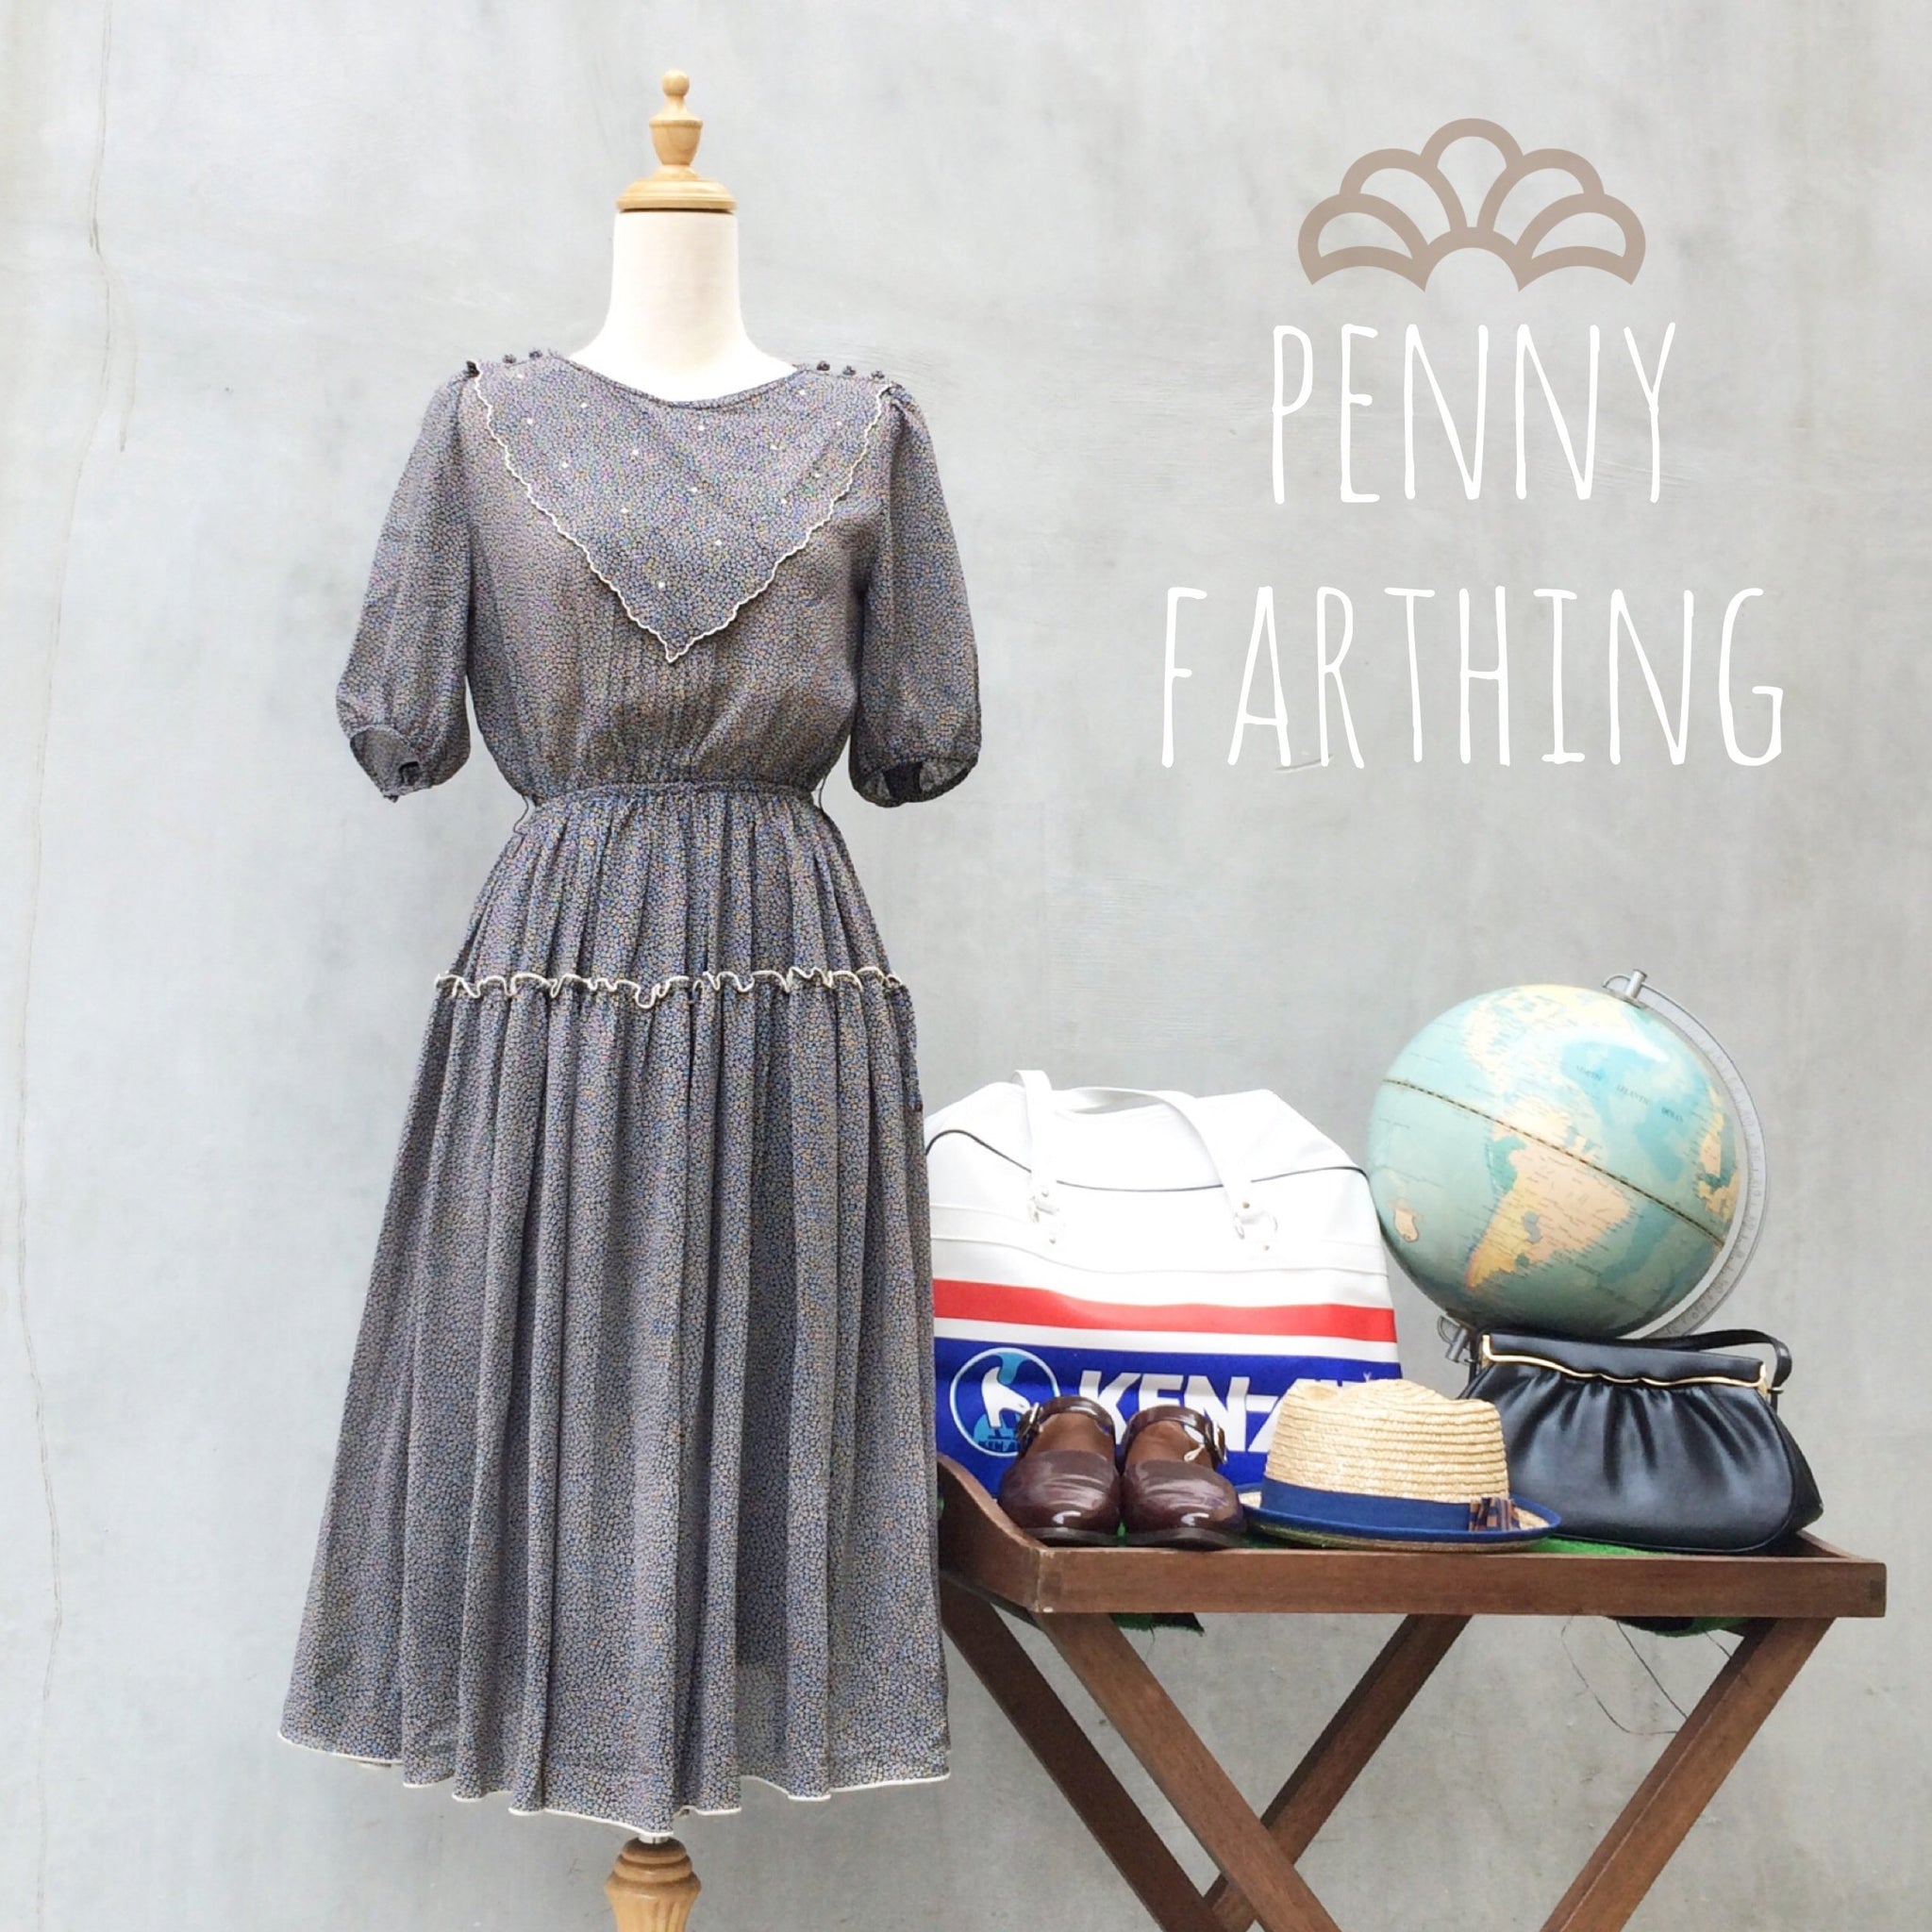 Penny Farthing | Vintage 1960s does 1920s gunne sax style Dress with triangle bib dickey